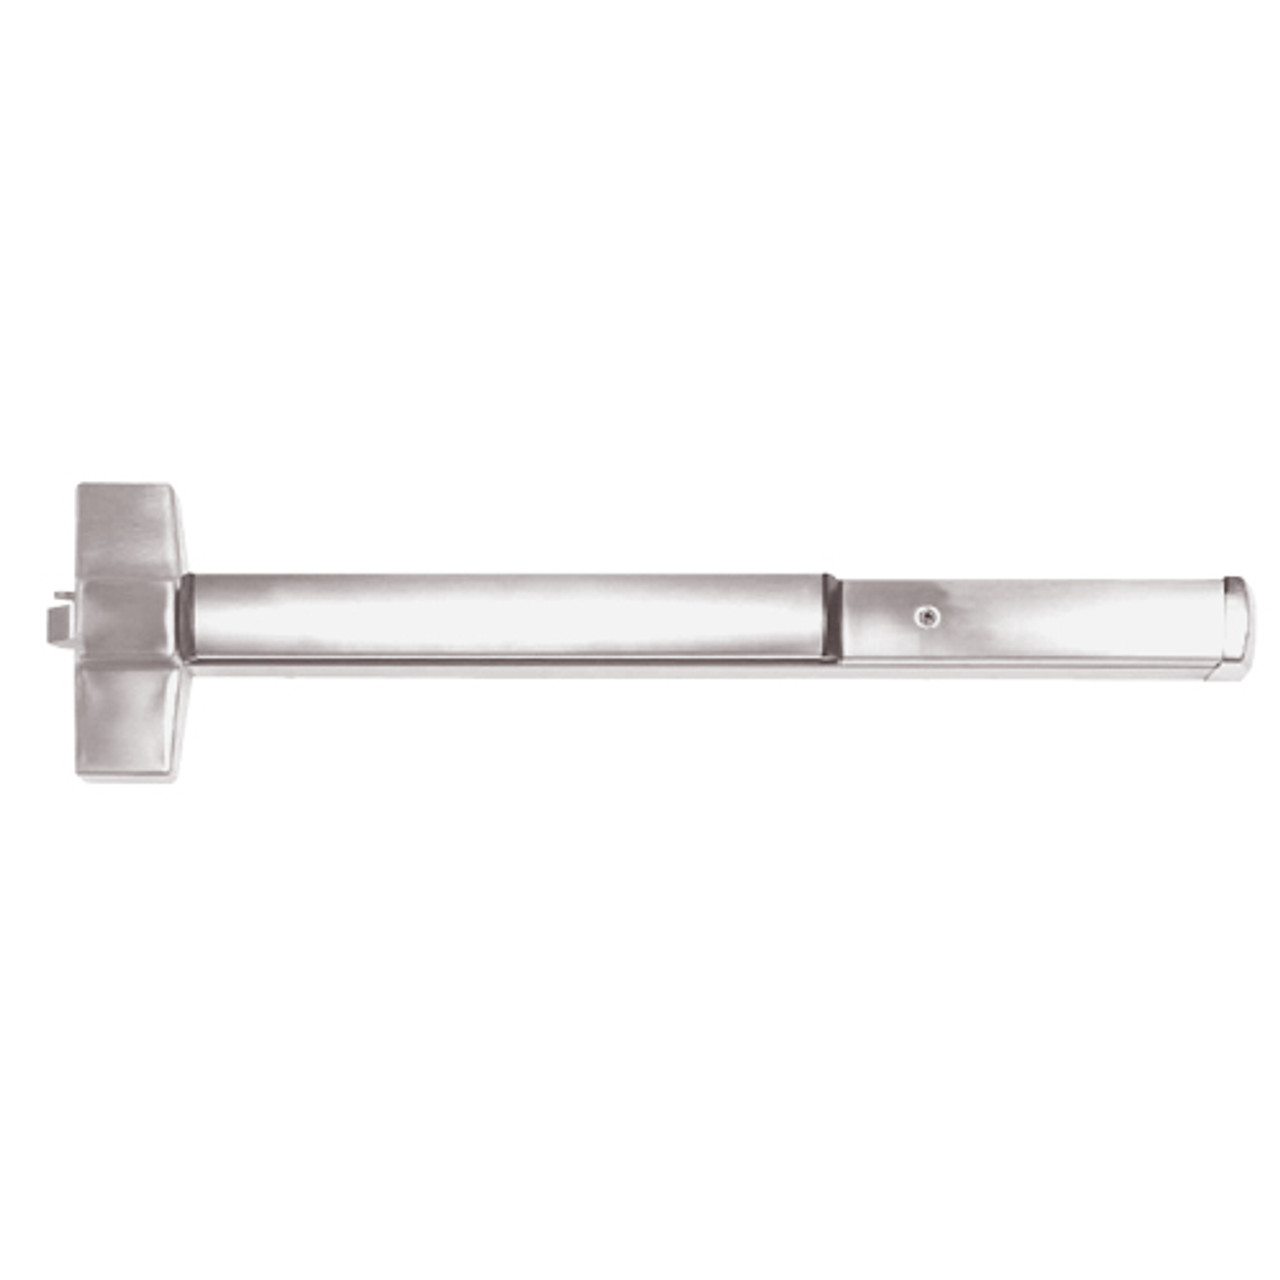 ED5200-630-W048-MELR-M92 Corbin ED5200 Series Non Fire Rated Exit Device with Motor Latch Retraction and Touchbar Monitoring in Satin Stainless Steel Finish